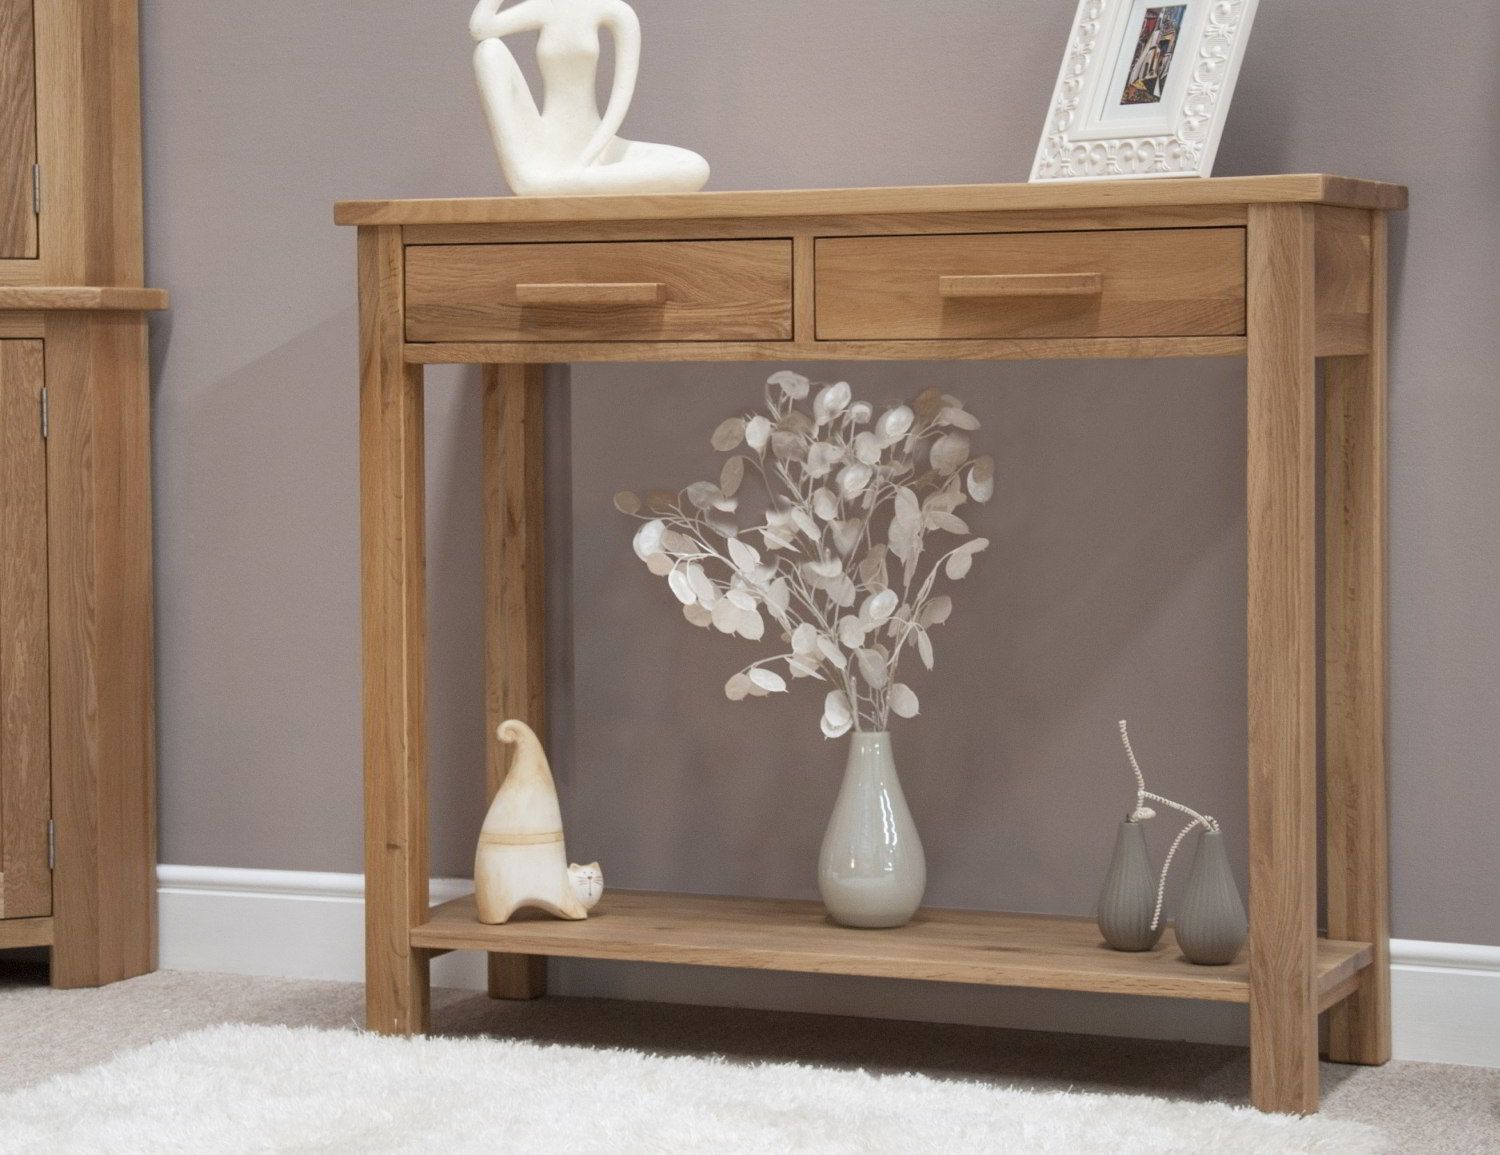 Eton Solid Oak Modern Furniture Hallway Hall Console Table | Ebay Regarding Large Modern Console Tables (View 1 of 20)